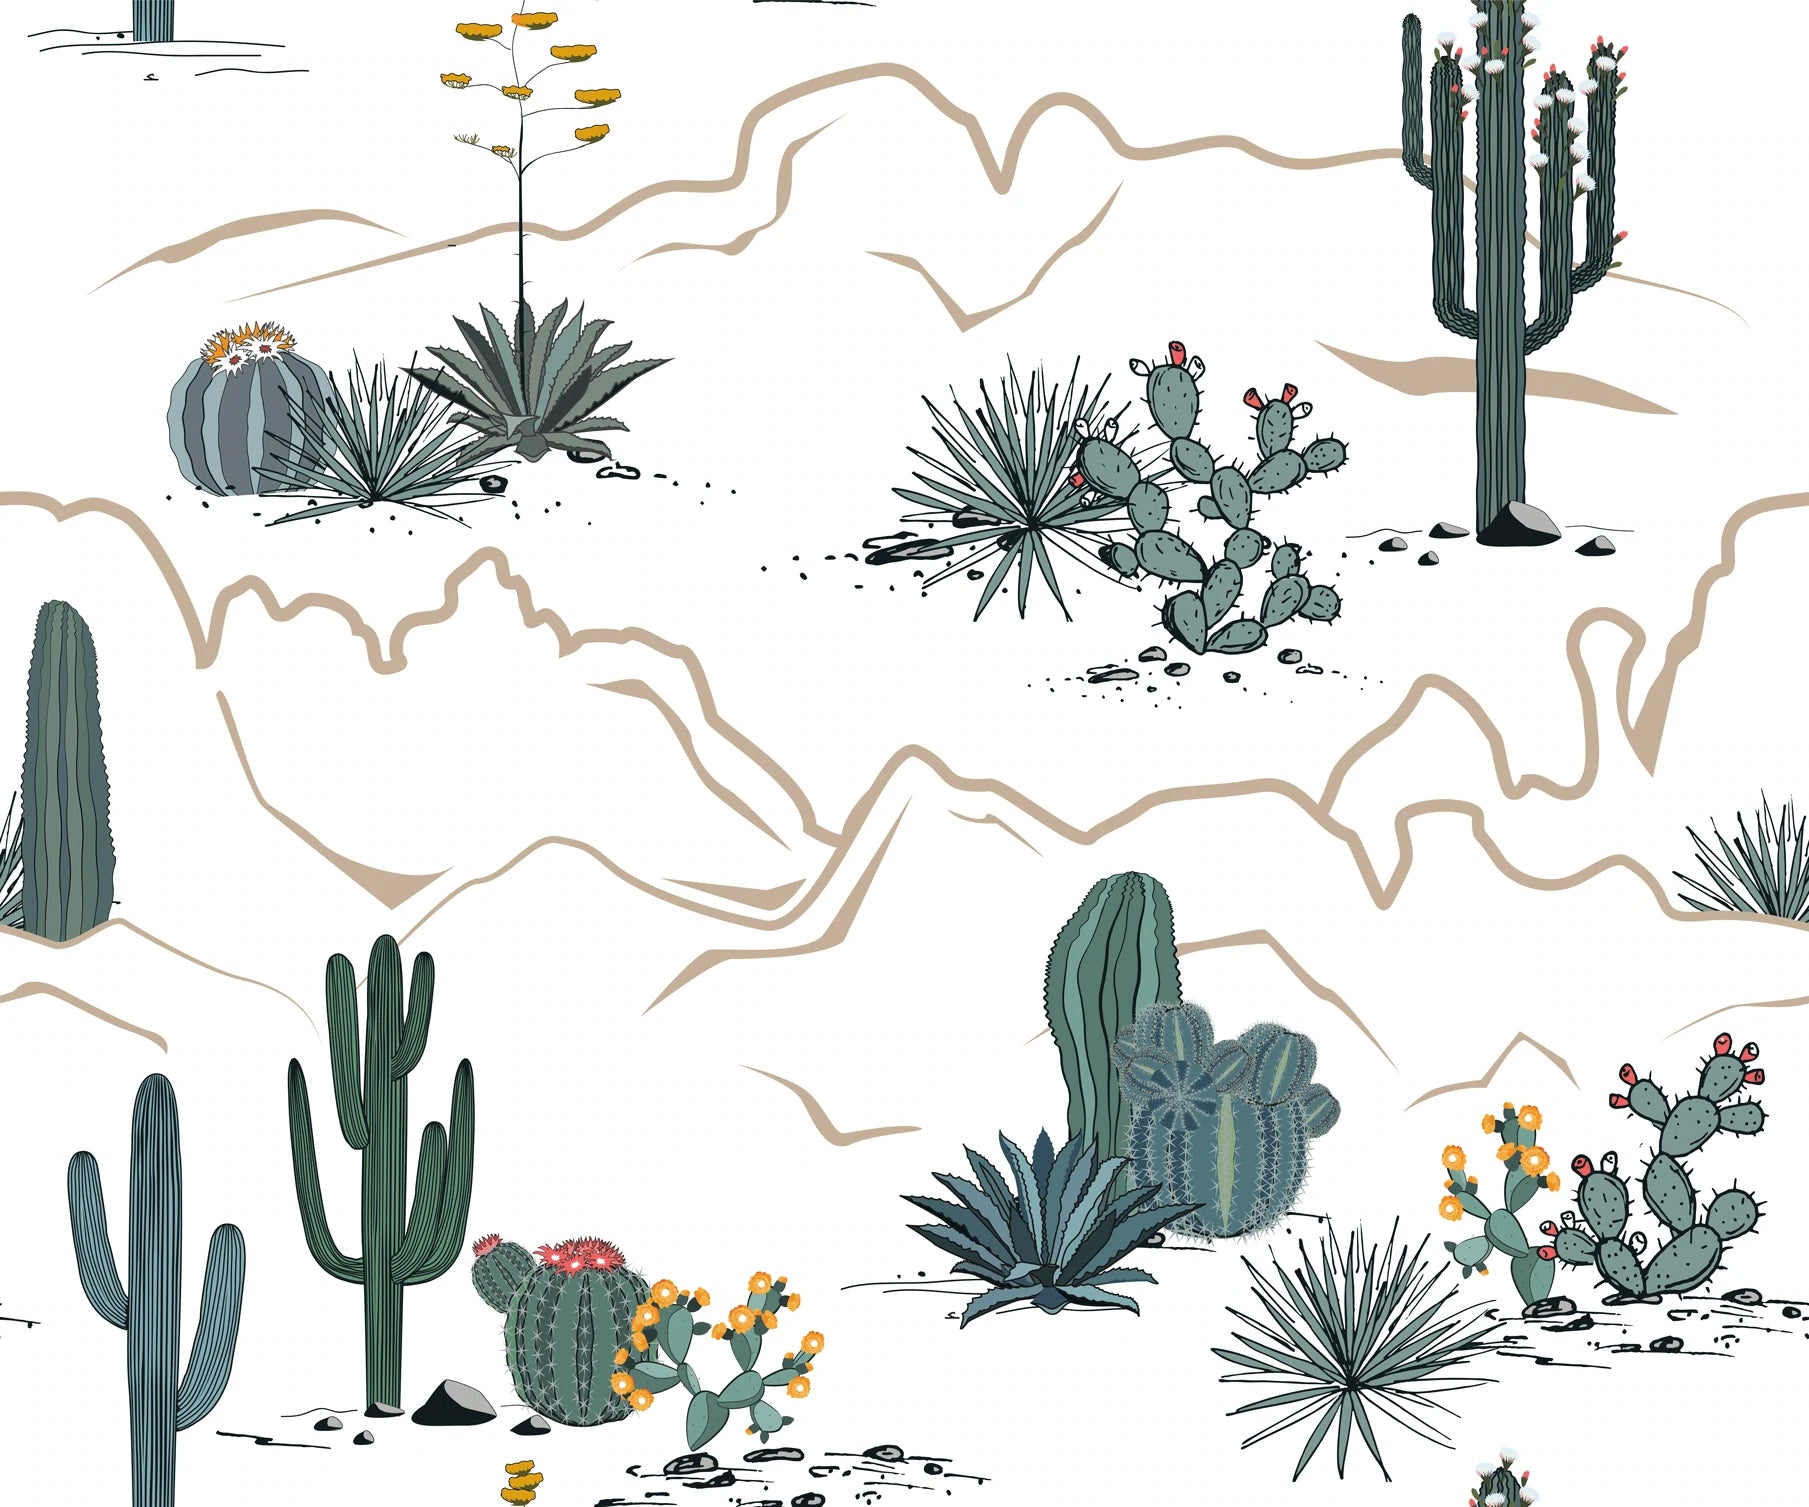 Cactus Mountain Wallpaper Mural, Suitable for Use as Home Decoration